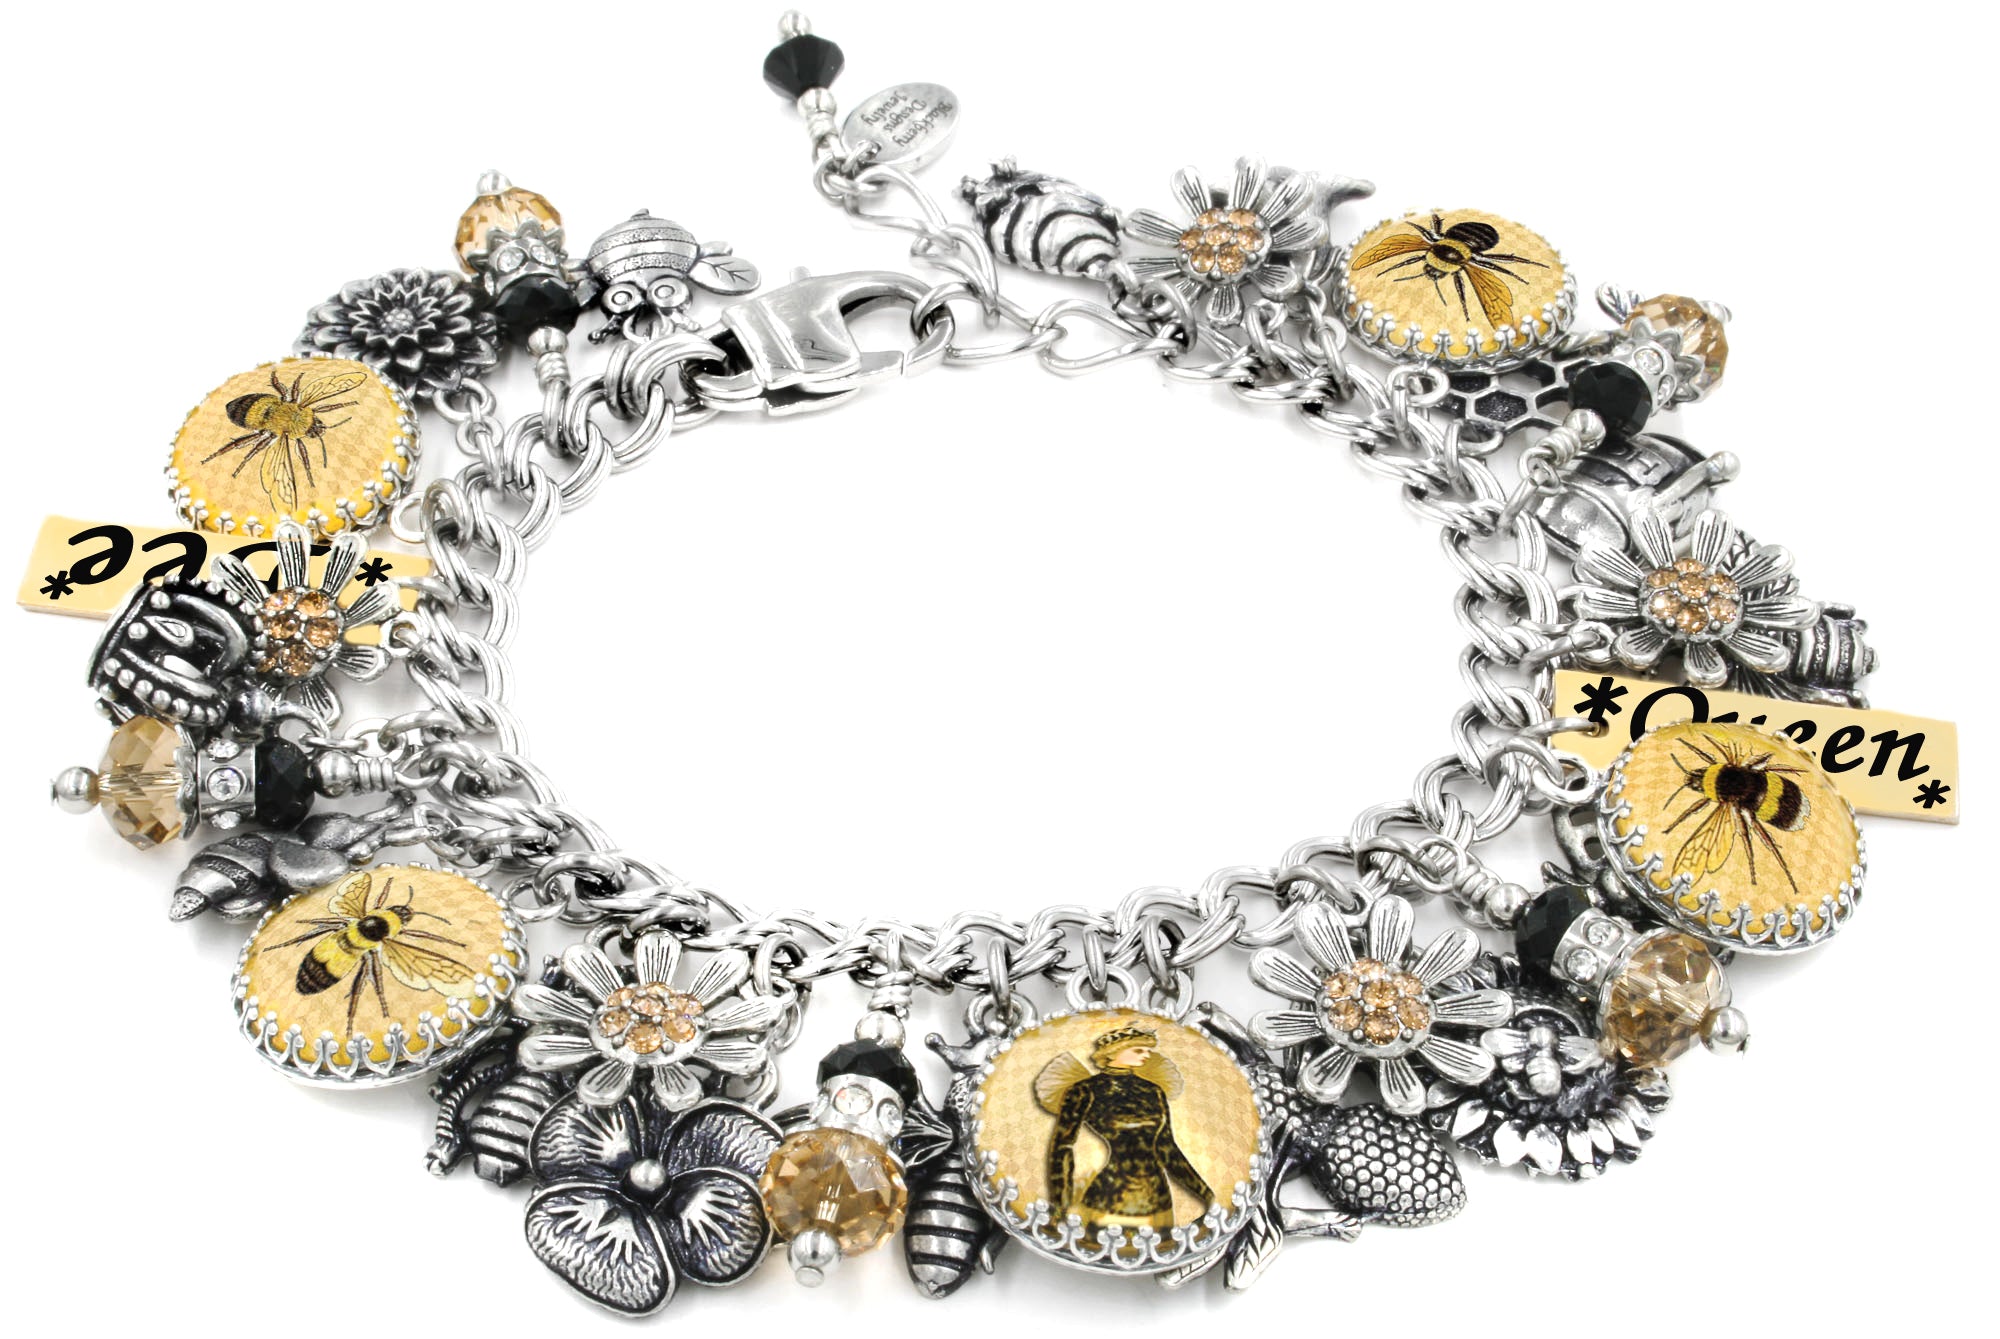 Personalized Bumble Bee Bracelet – Perfect for Gardeners